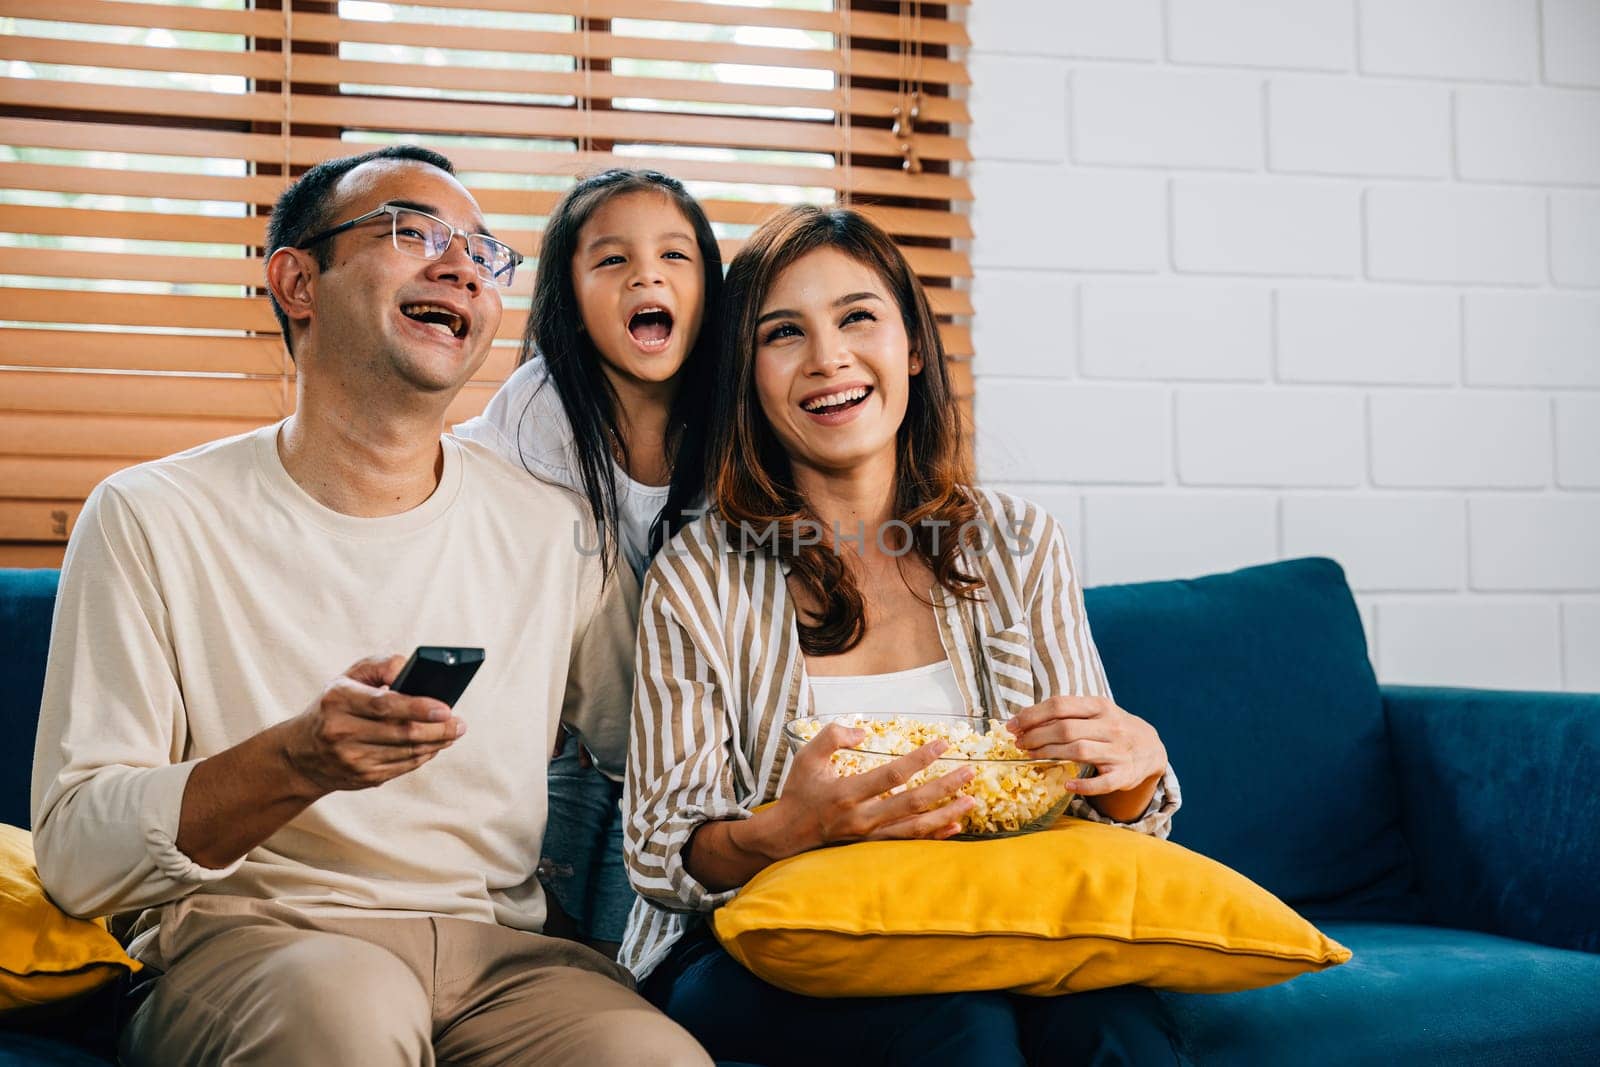 In their cozy house smiling family gathers on sofa for video time watching TV with popcorn. father mother son daughter and schoolgirl share laughter happiness and enjoyment fostering togetherness.